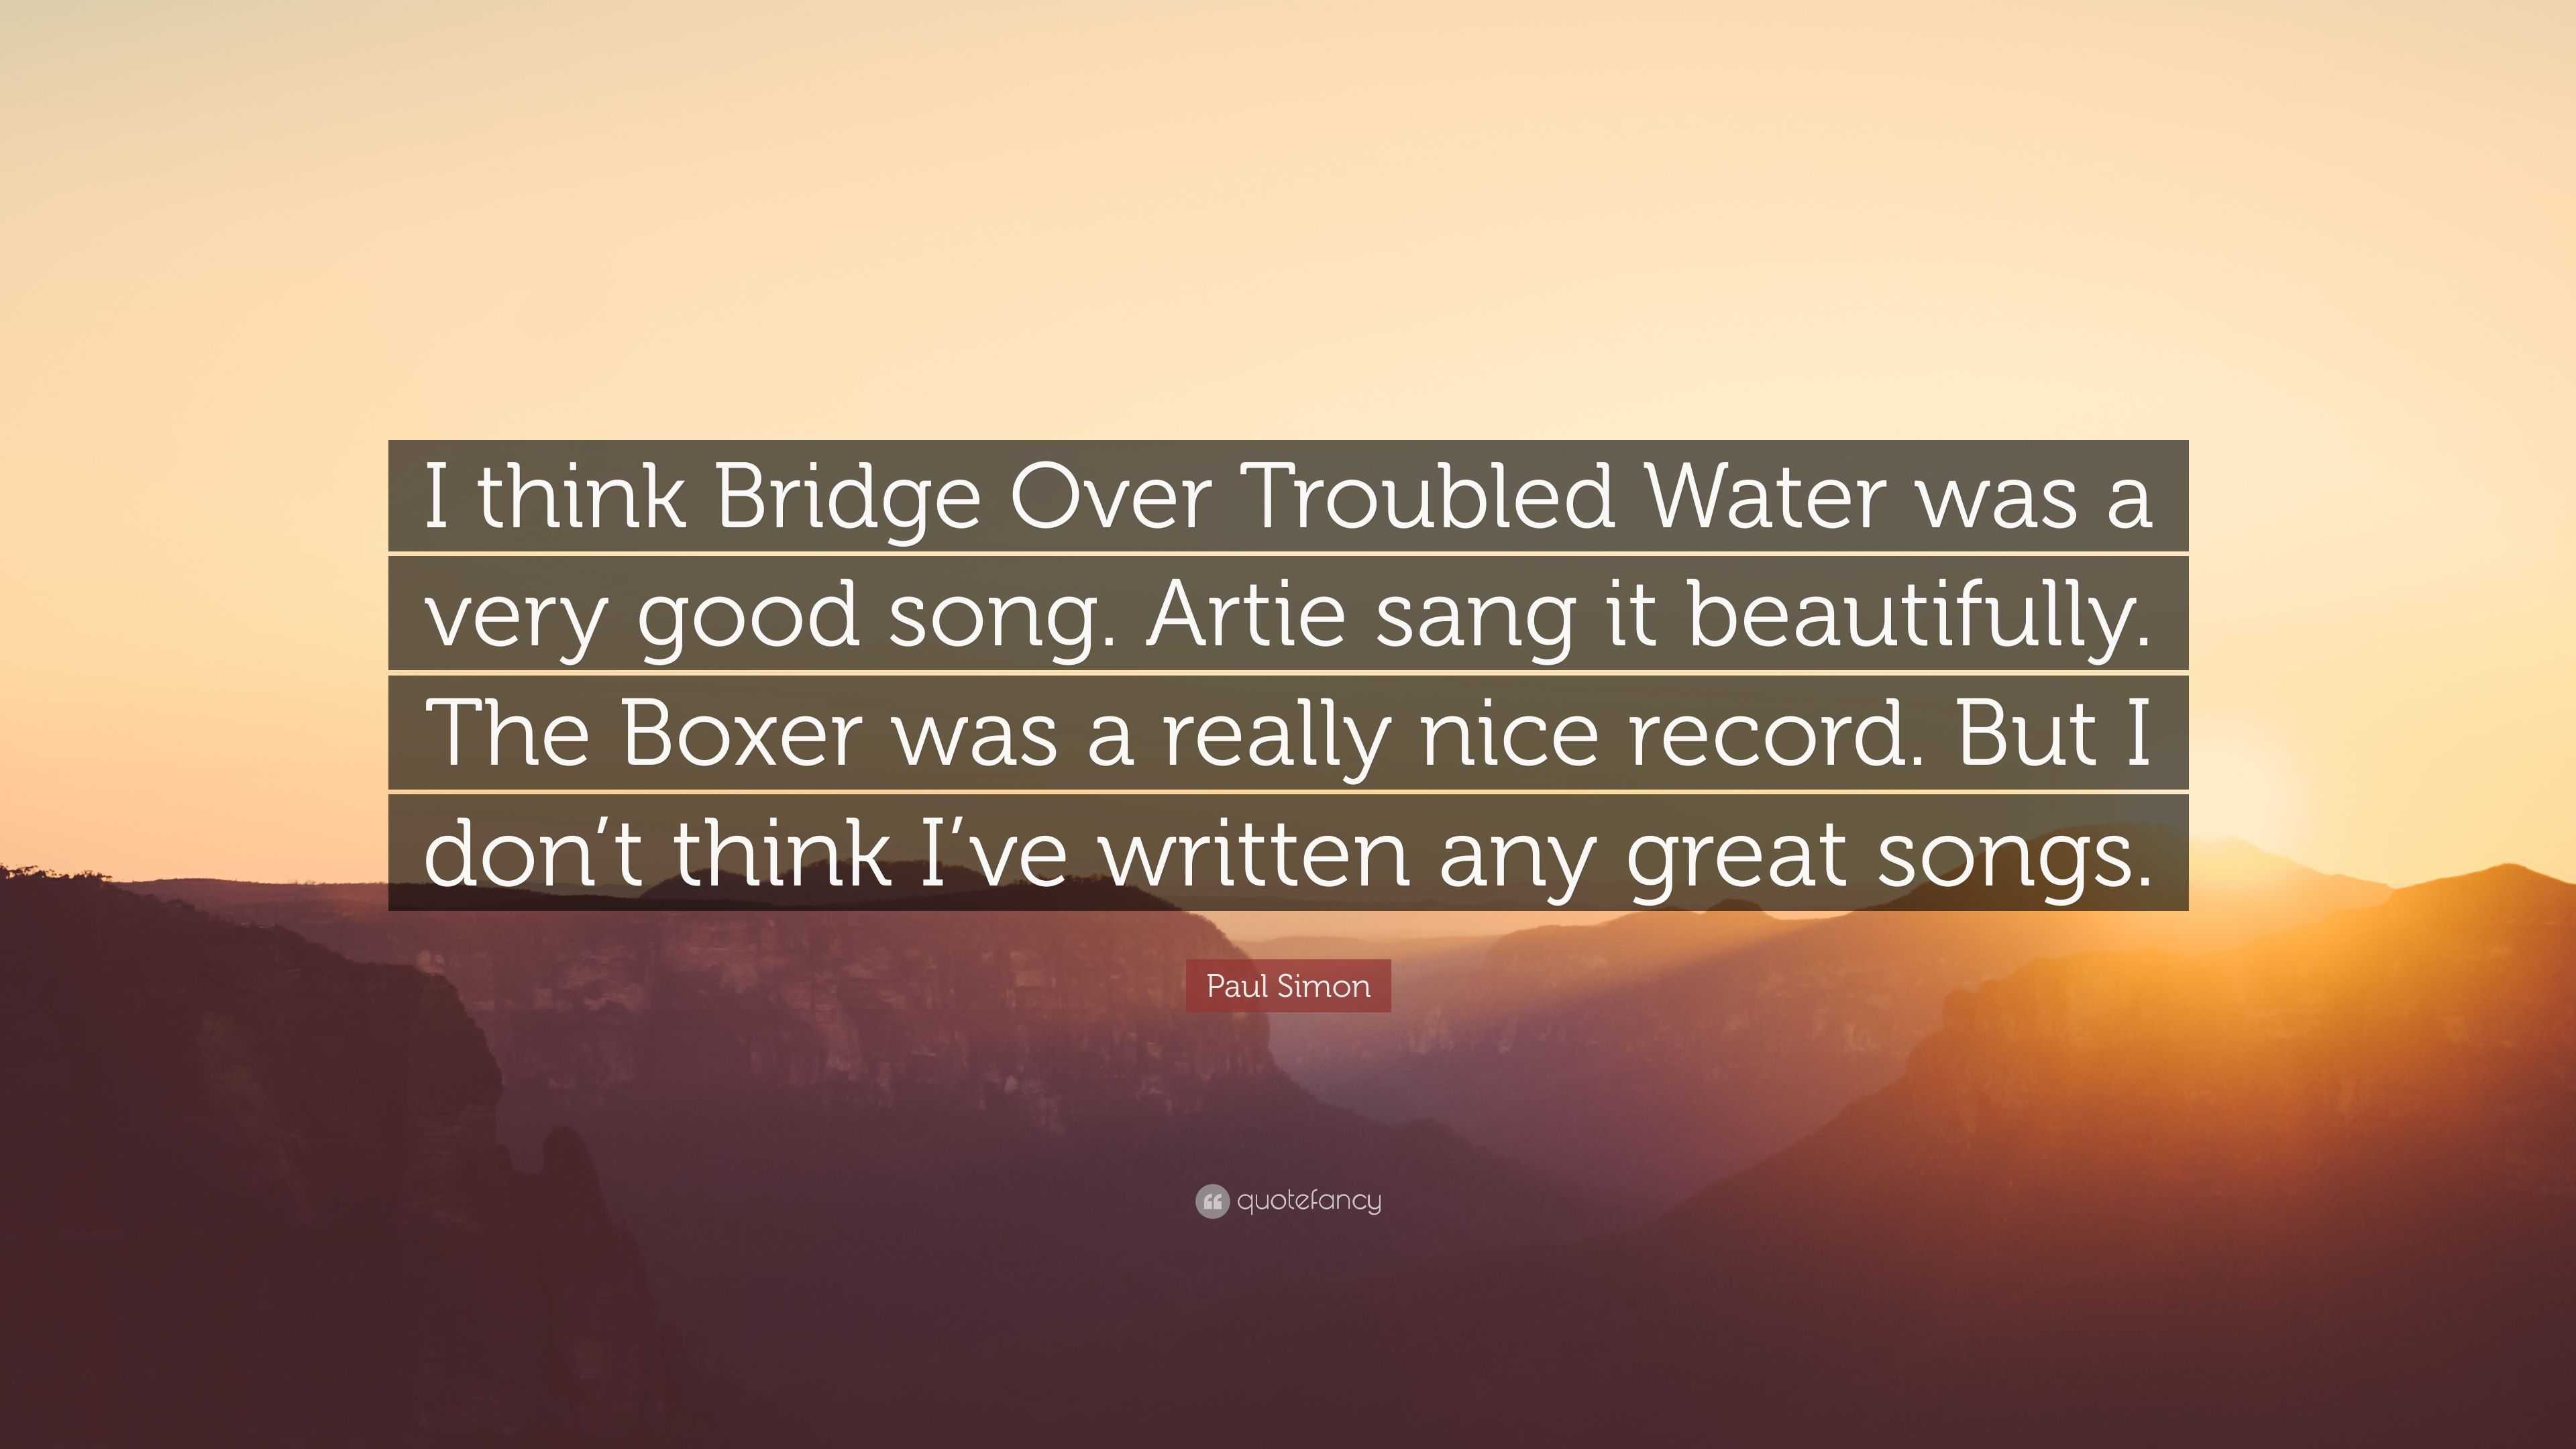 Paul Simon Quote: “I think Bridge Over Troubled Water was a very good song.  Artie sang it beautifully. The Boxer was a really nice record. ”